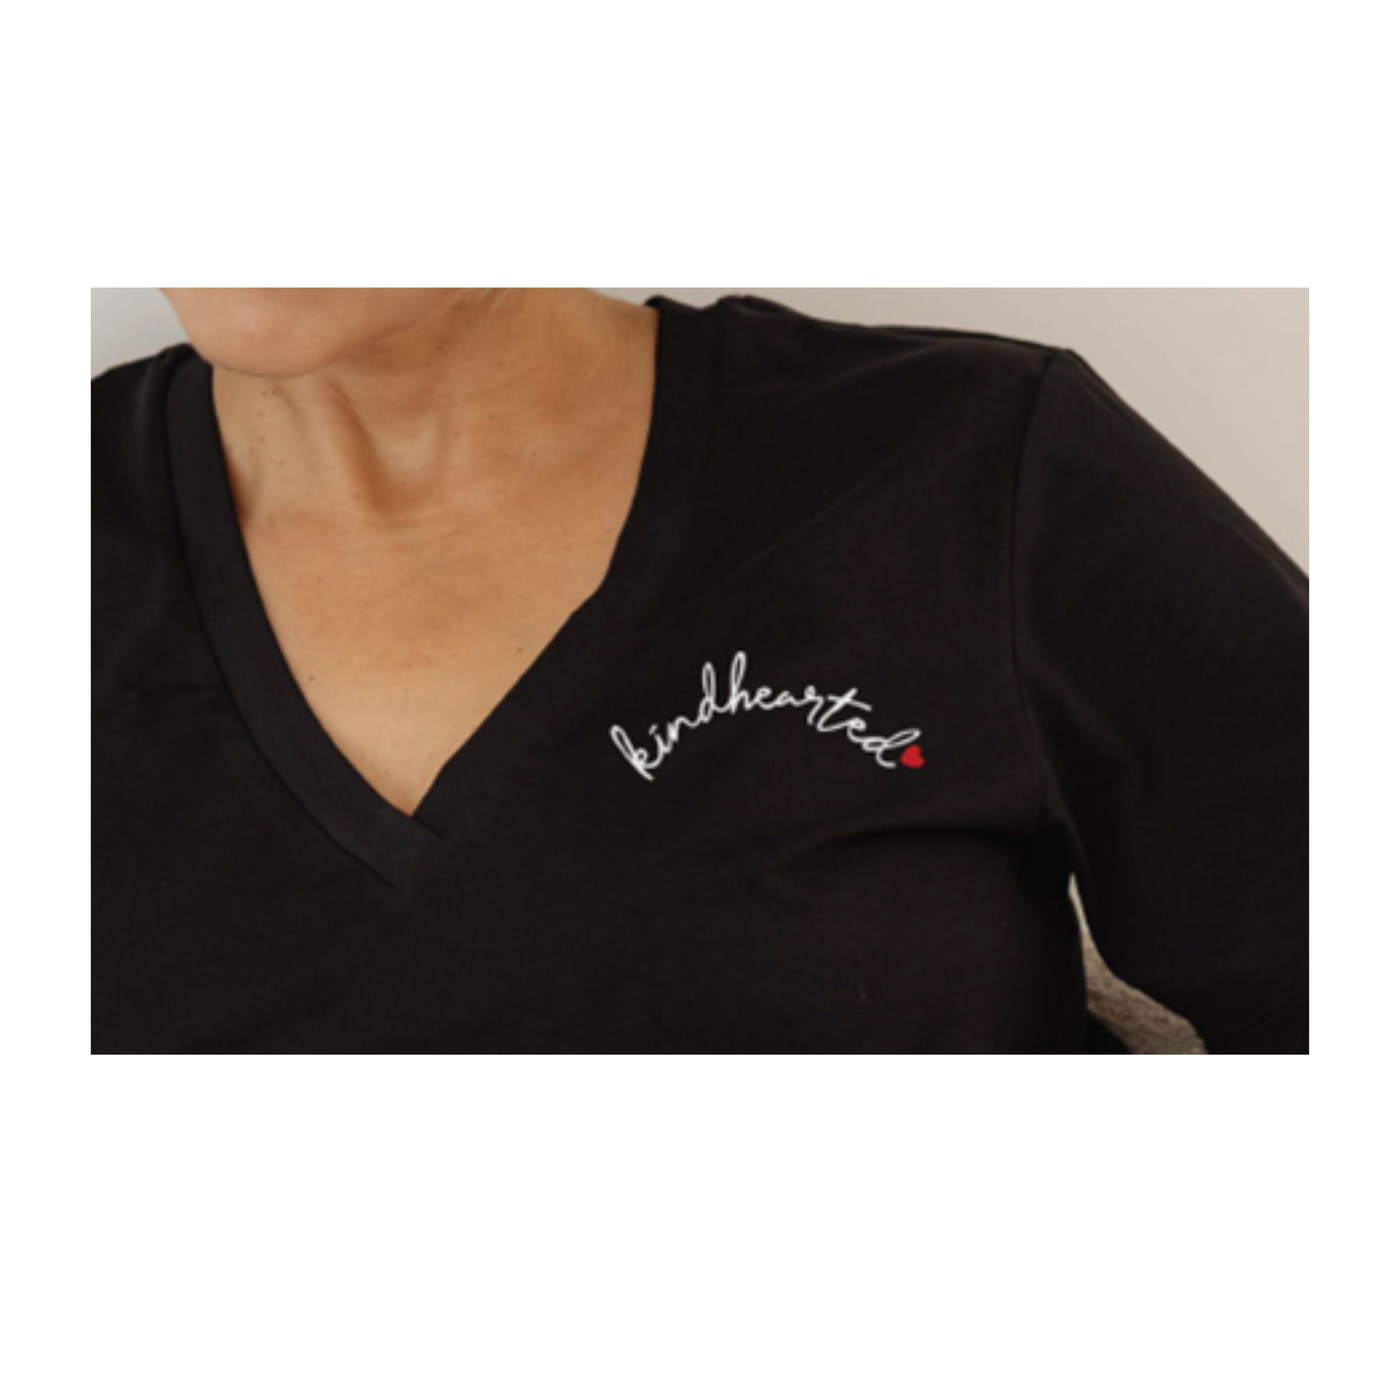 "kindhearted" on the chest of a black vneck shirt - ladies